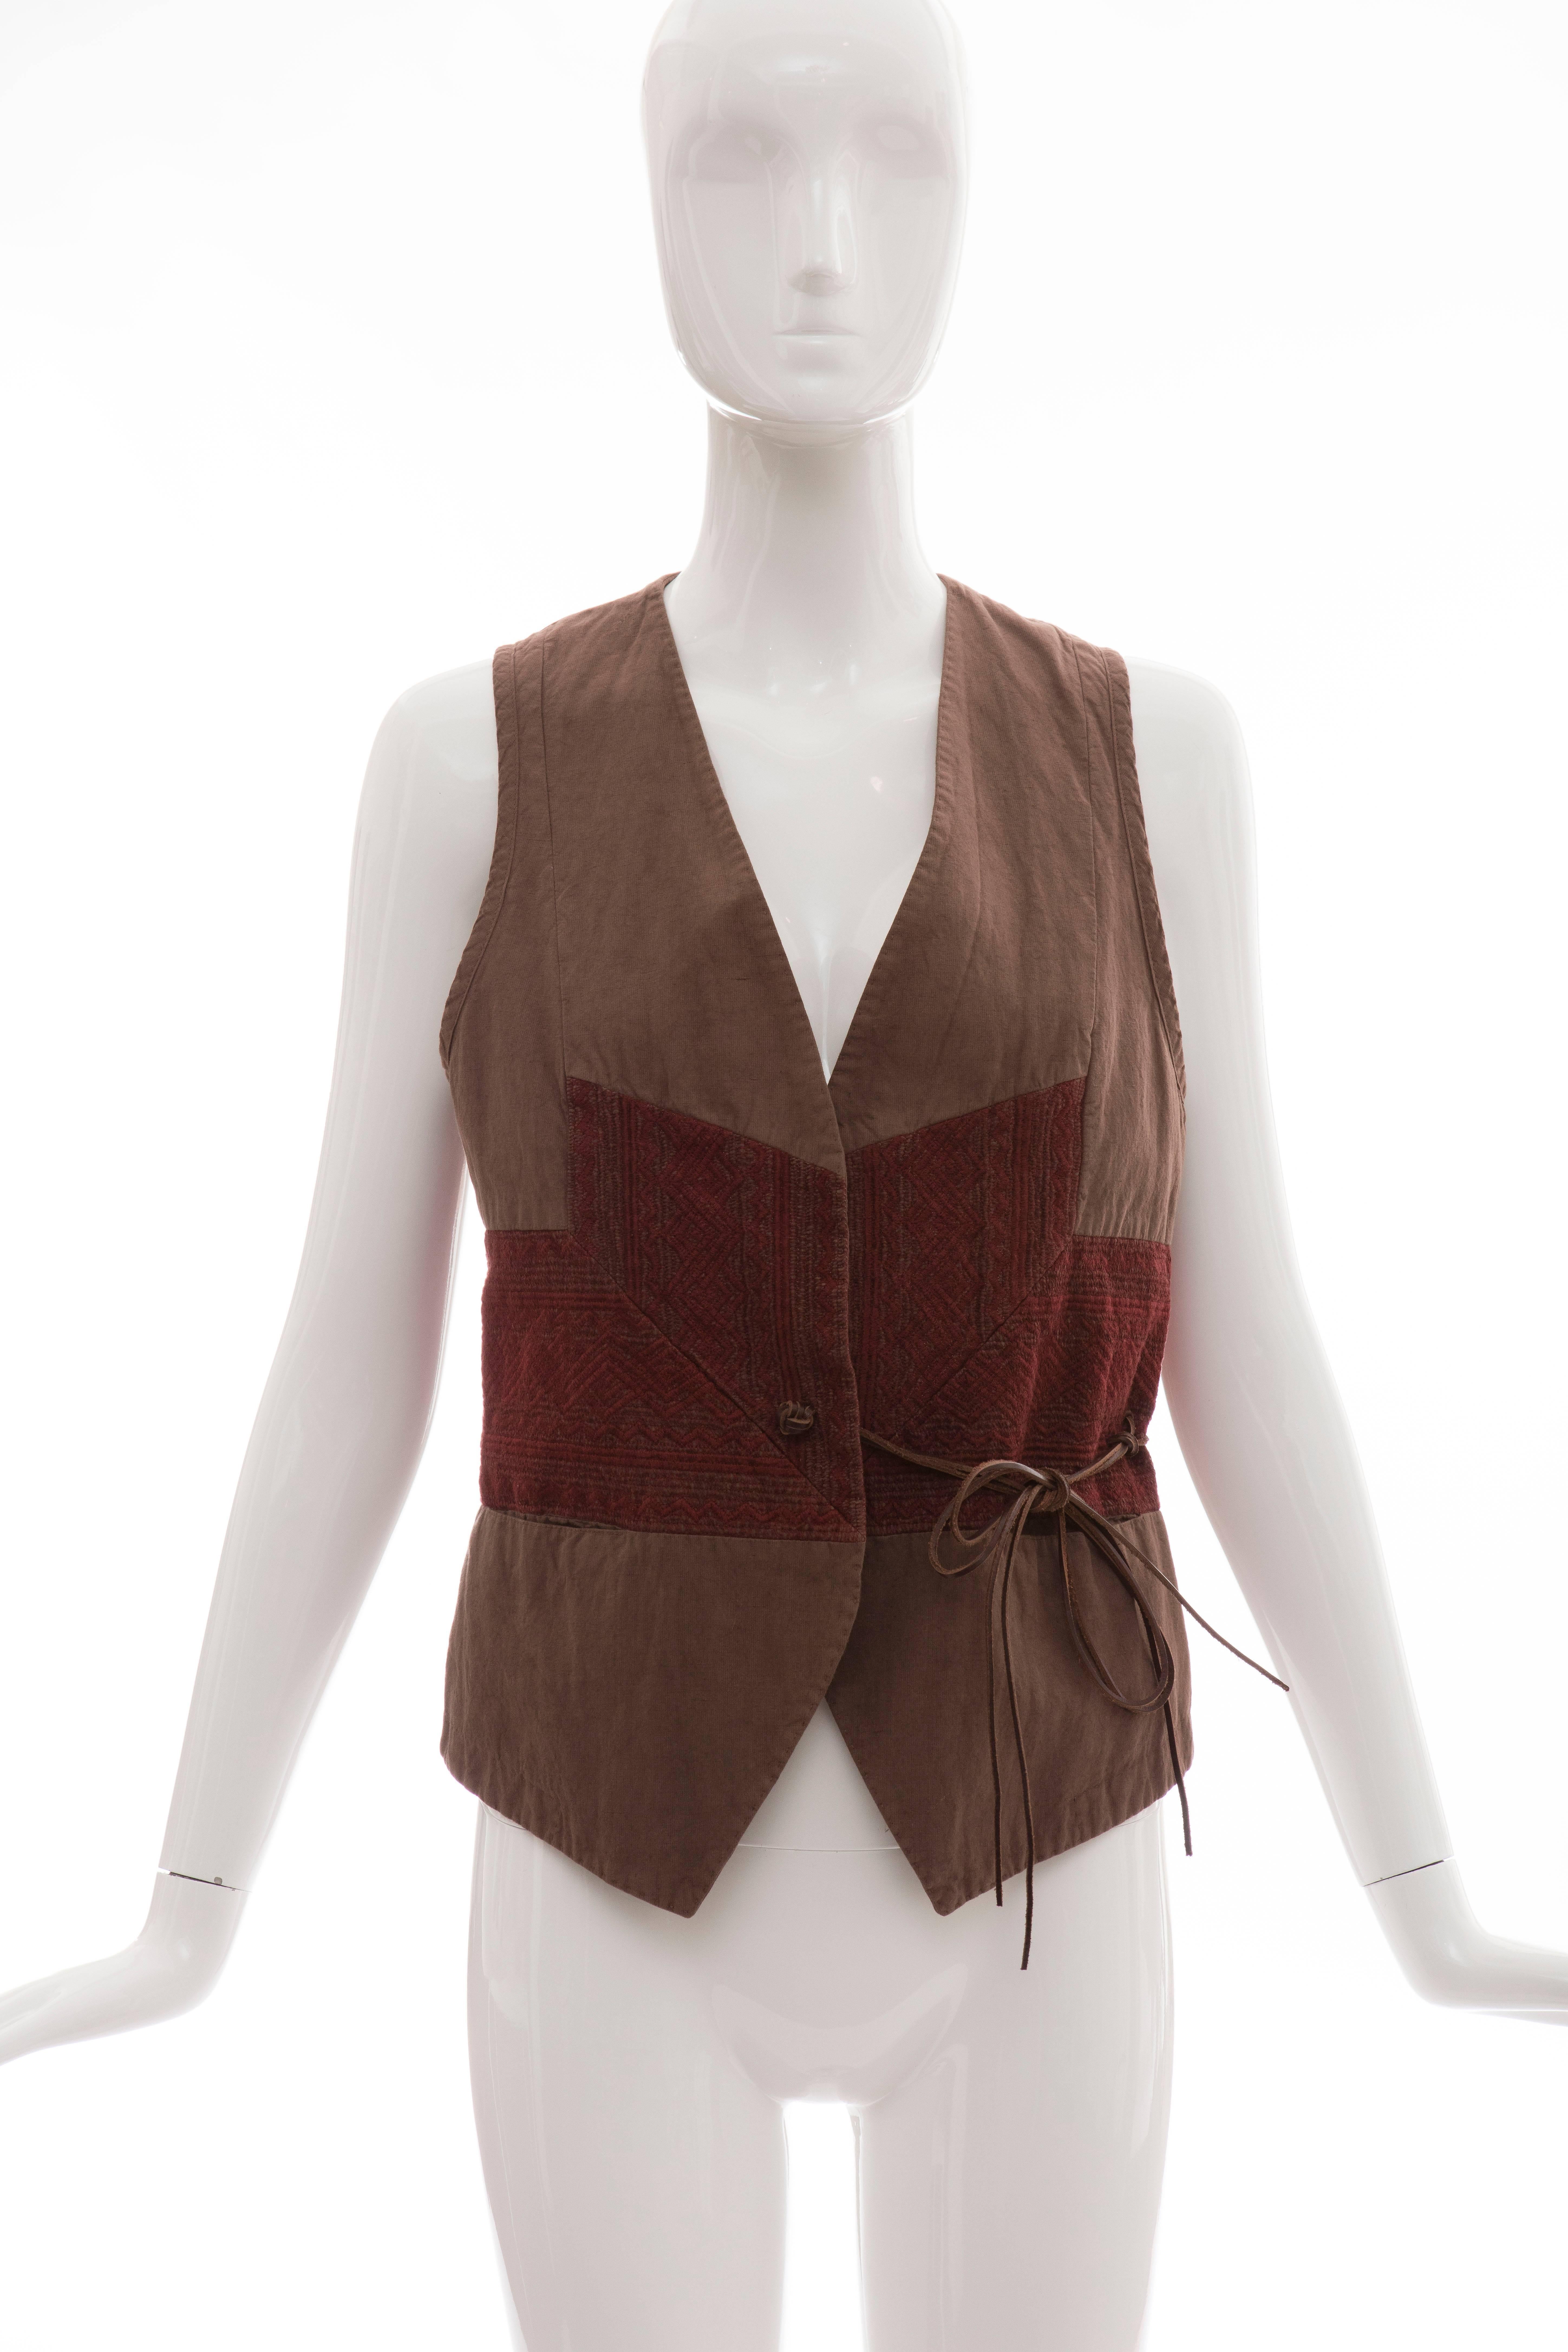 Dries Van Noten Spring-Summer 2002-2003 cotton/linen vest with one front pocket and leather tie front. 

Medium

Bust: 36